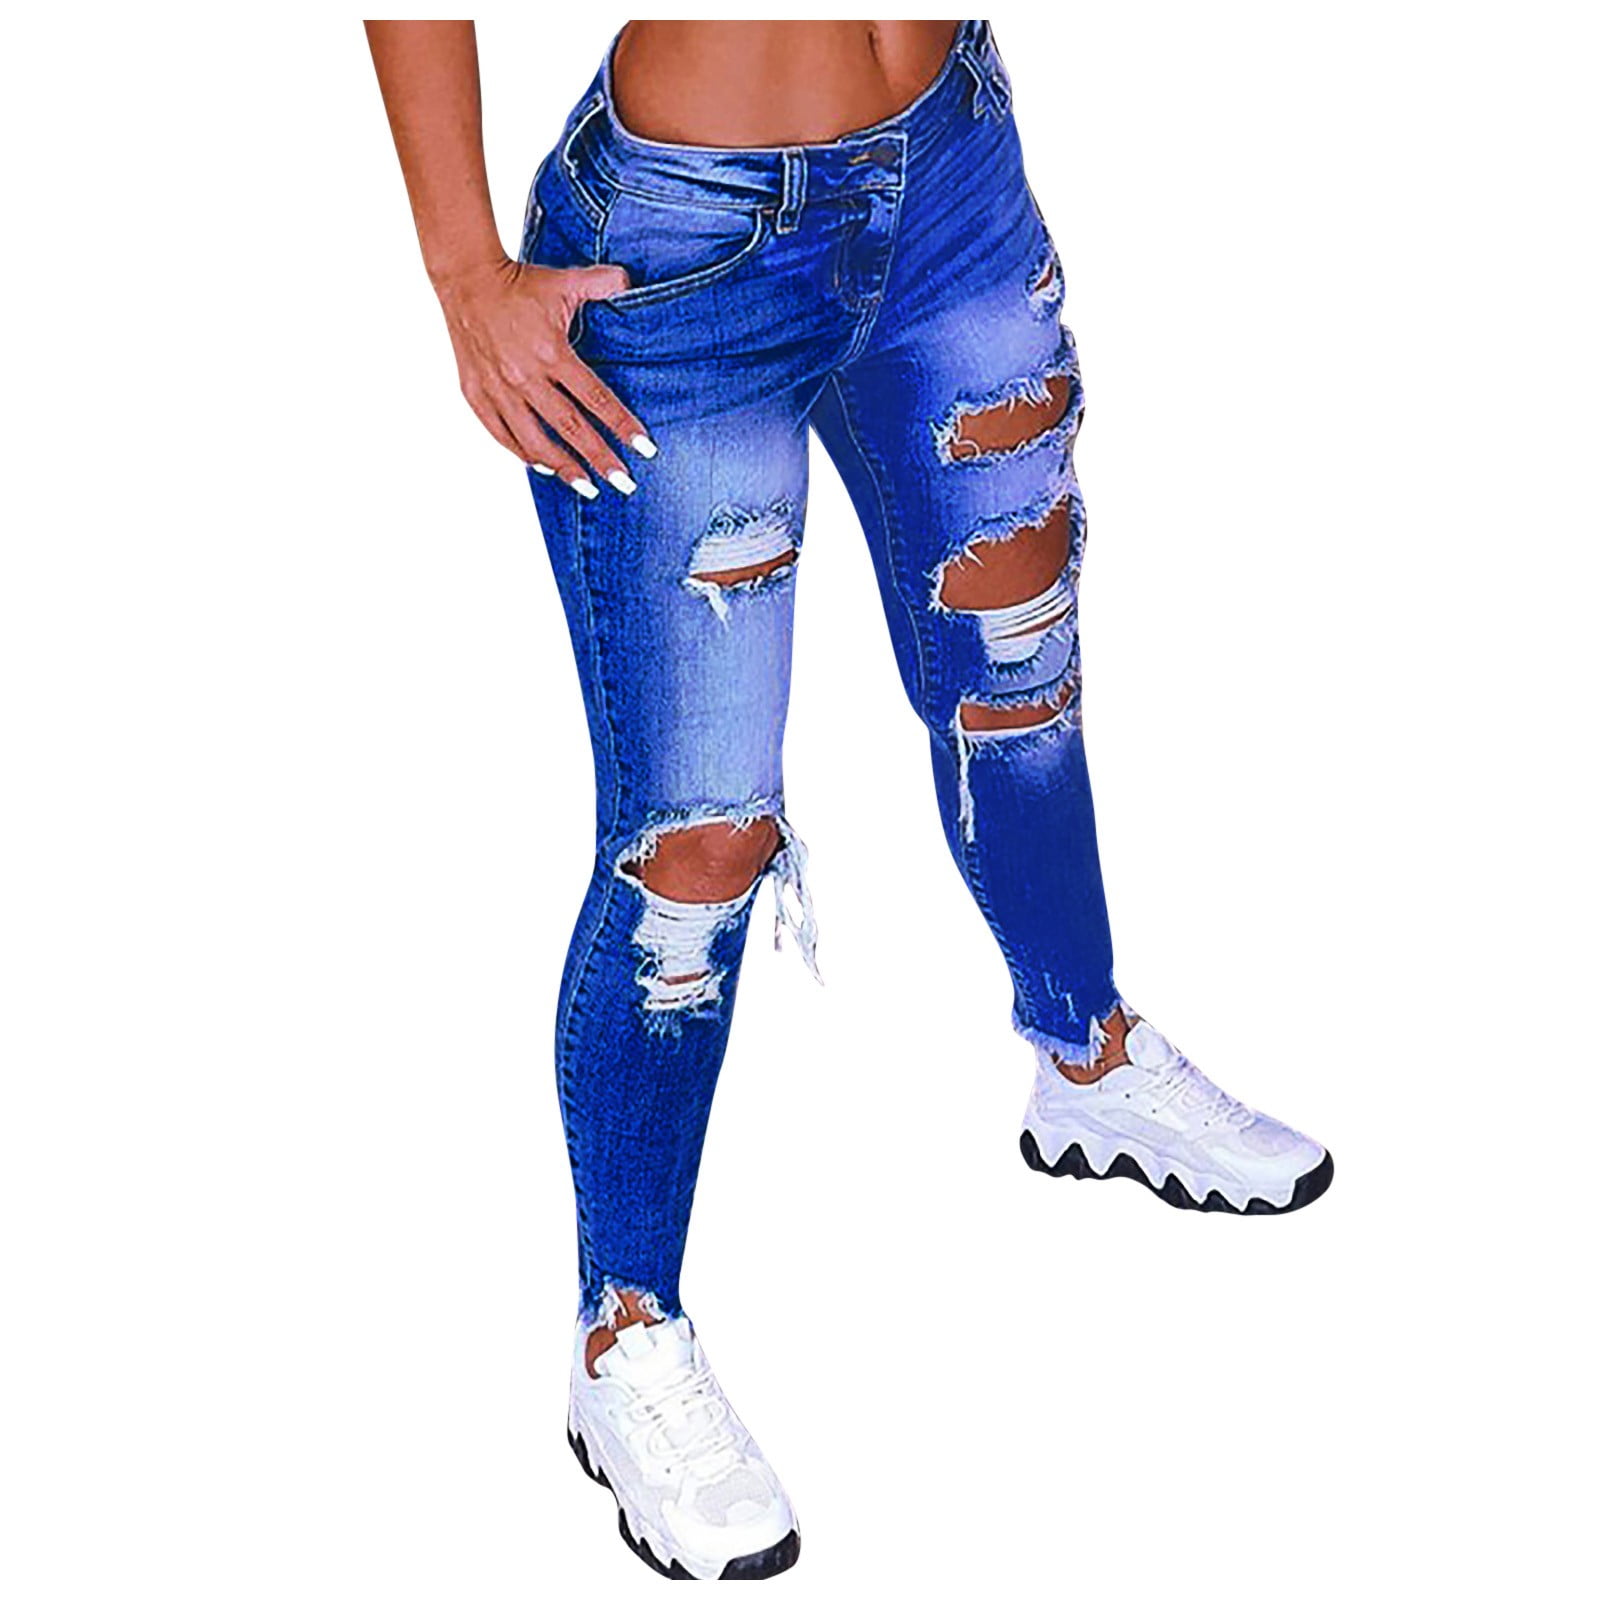 Bigersell Women's Misses Classic Fit Pant Full Length Pants Women's Fashion  Casual High Waist Elastic Waist Drawstring Straps Solid Color Ruffle Wide  Leg Long Pants Ripped Distressed Denim Pants 